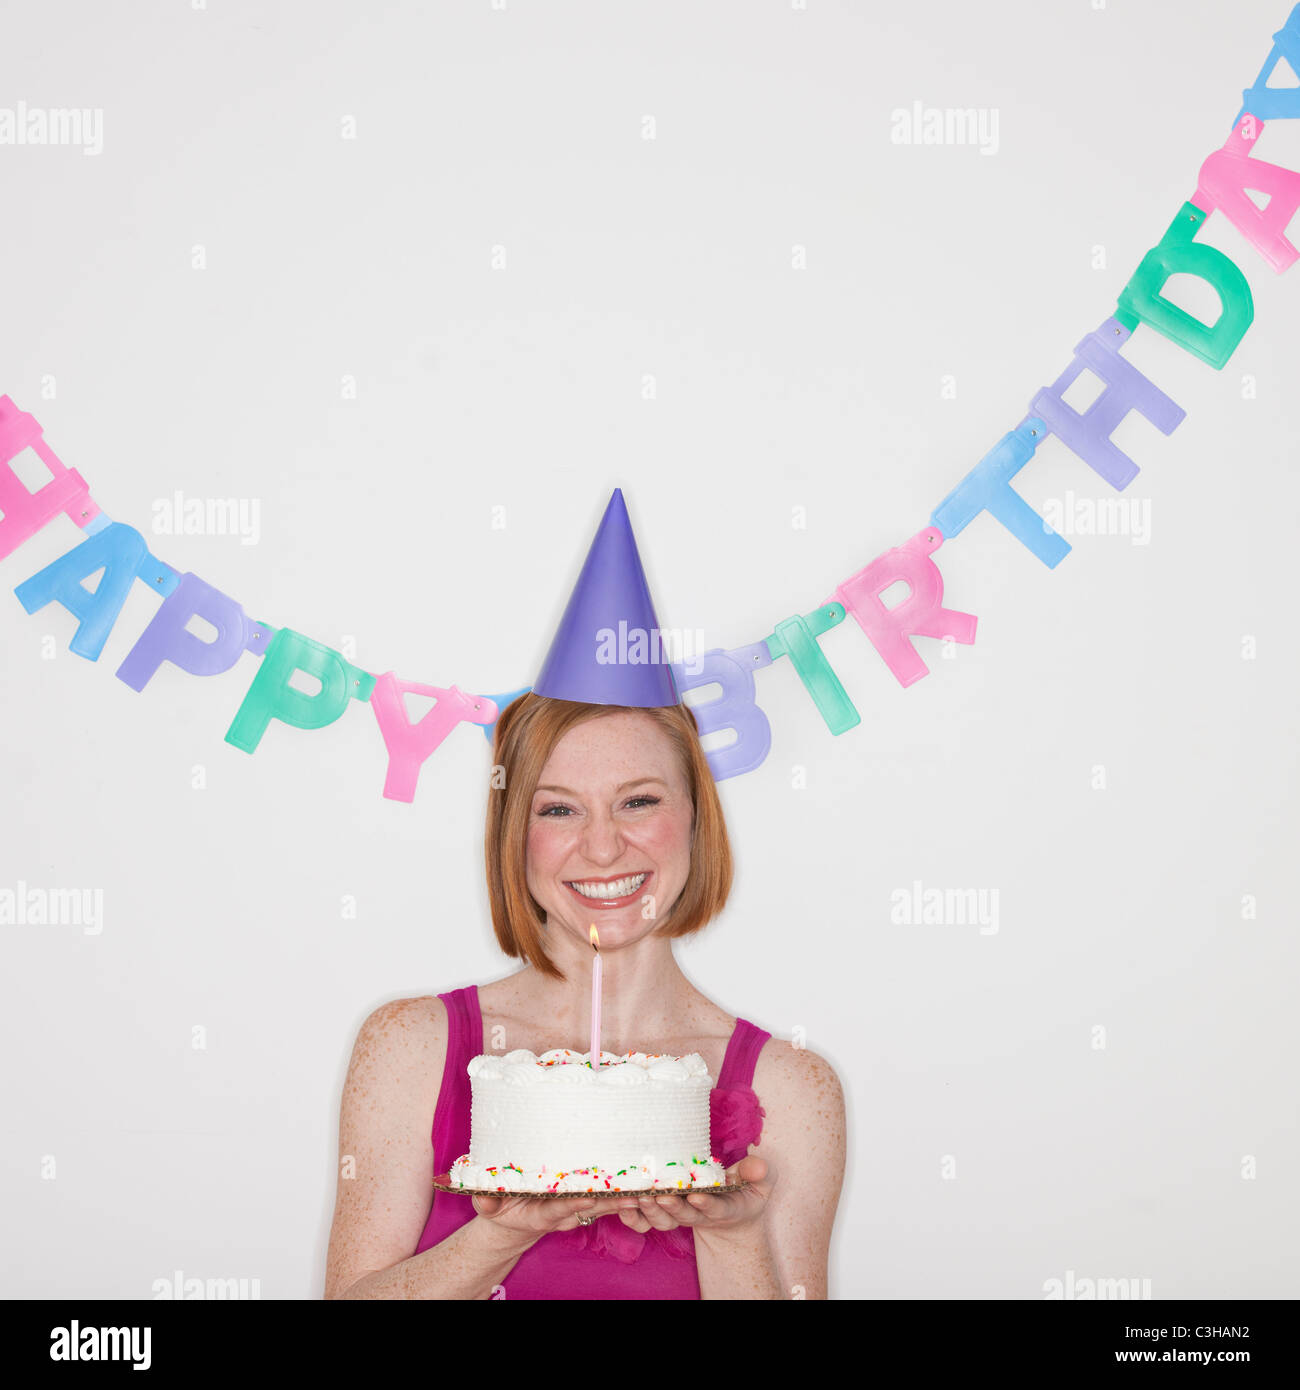 Portrait of woman celebrating birthday Banque D'Images